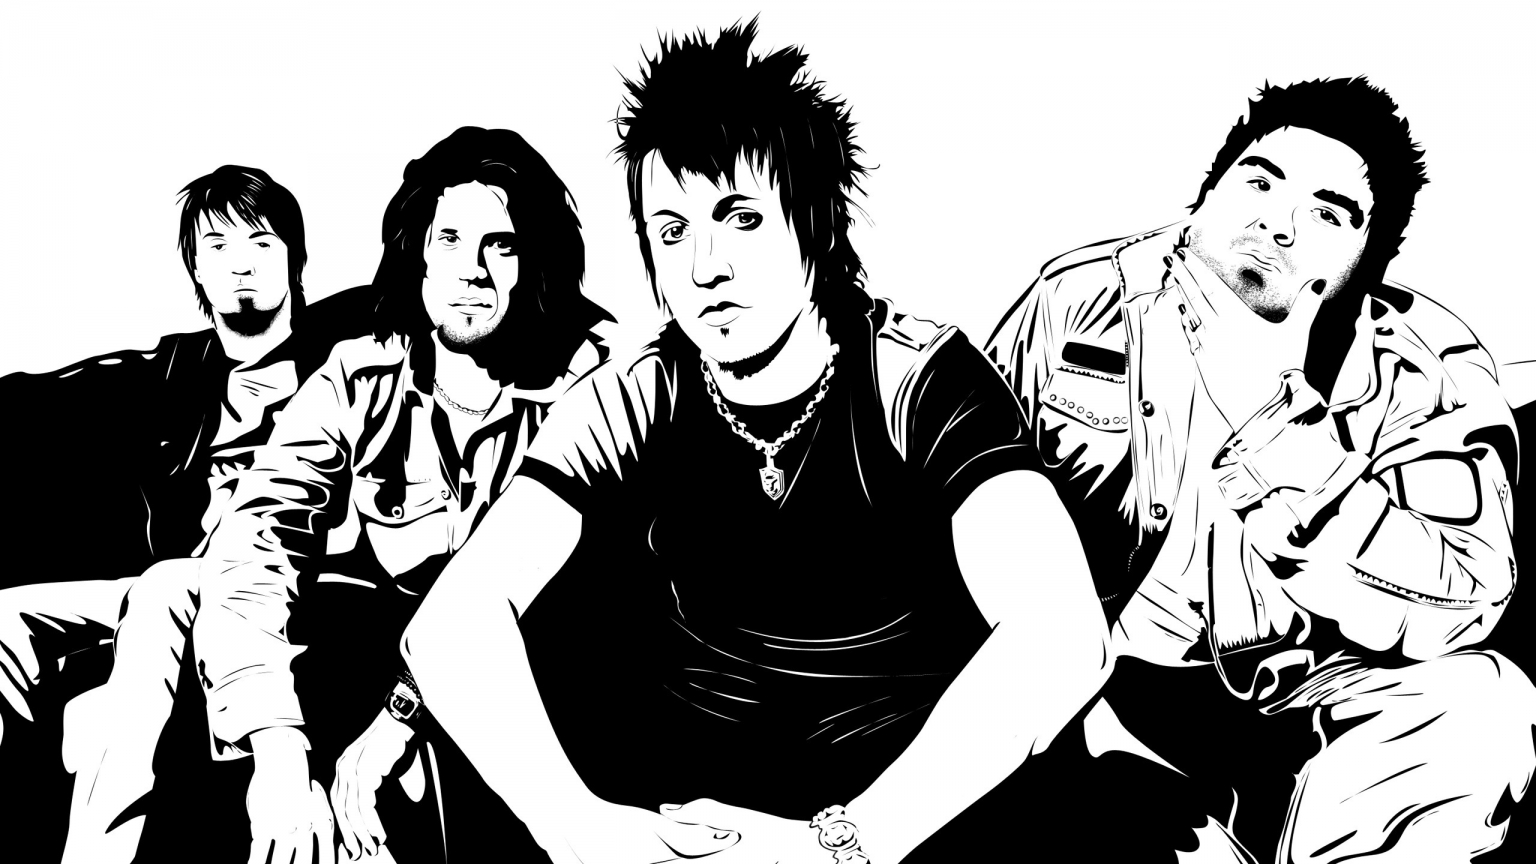 Papa Roach for 1536 x 864 HDTV resolution